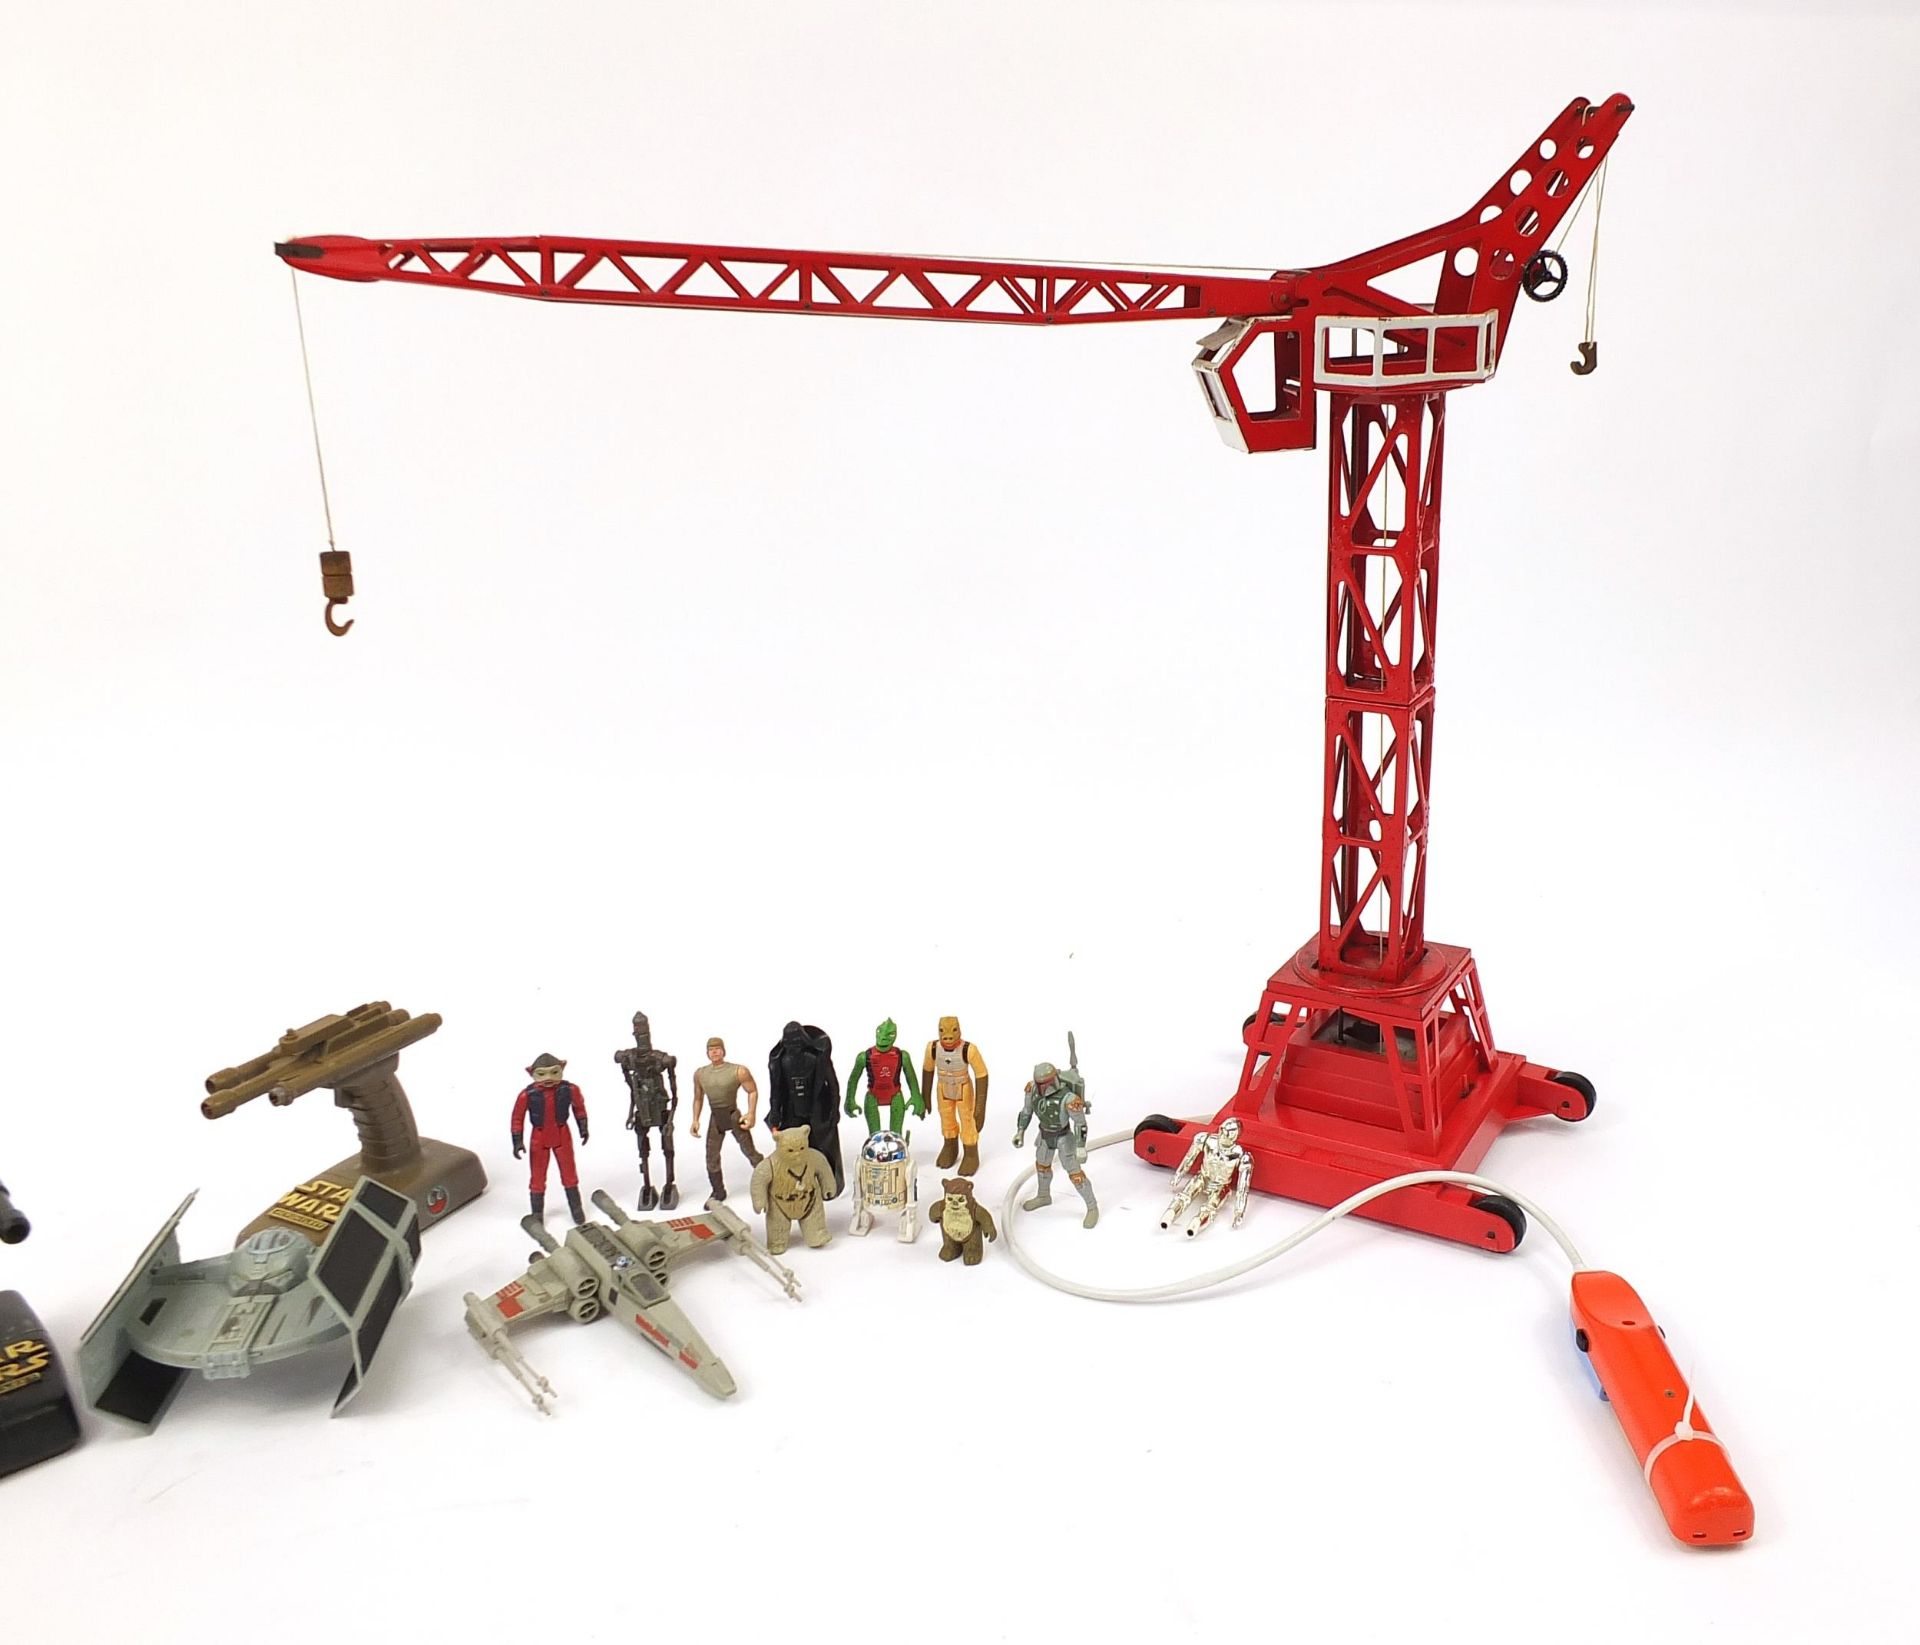 Vintage Star Wars figures and vehicles and a red Meccano design metal crane, the crane 60cm high - Image 5 of 6